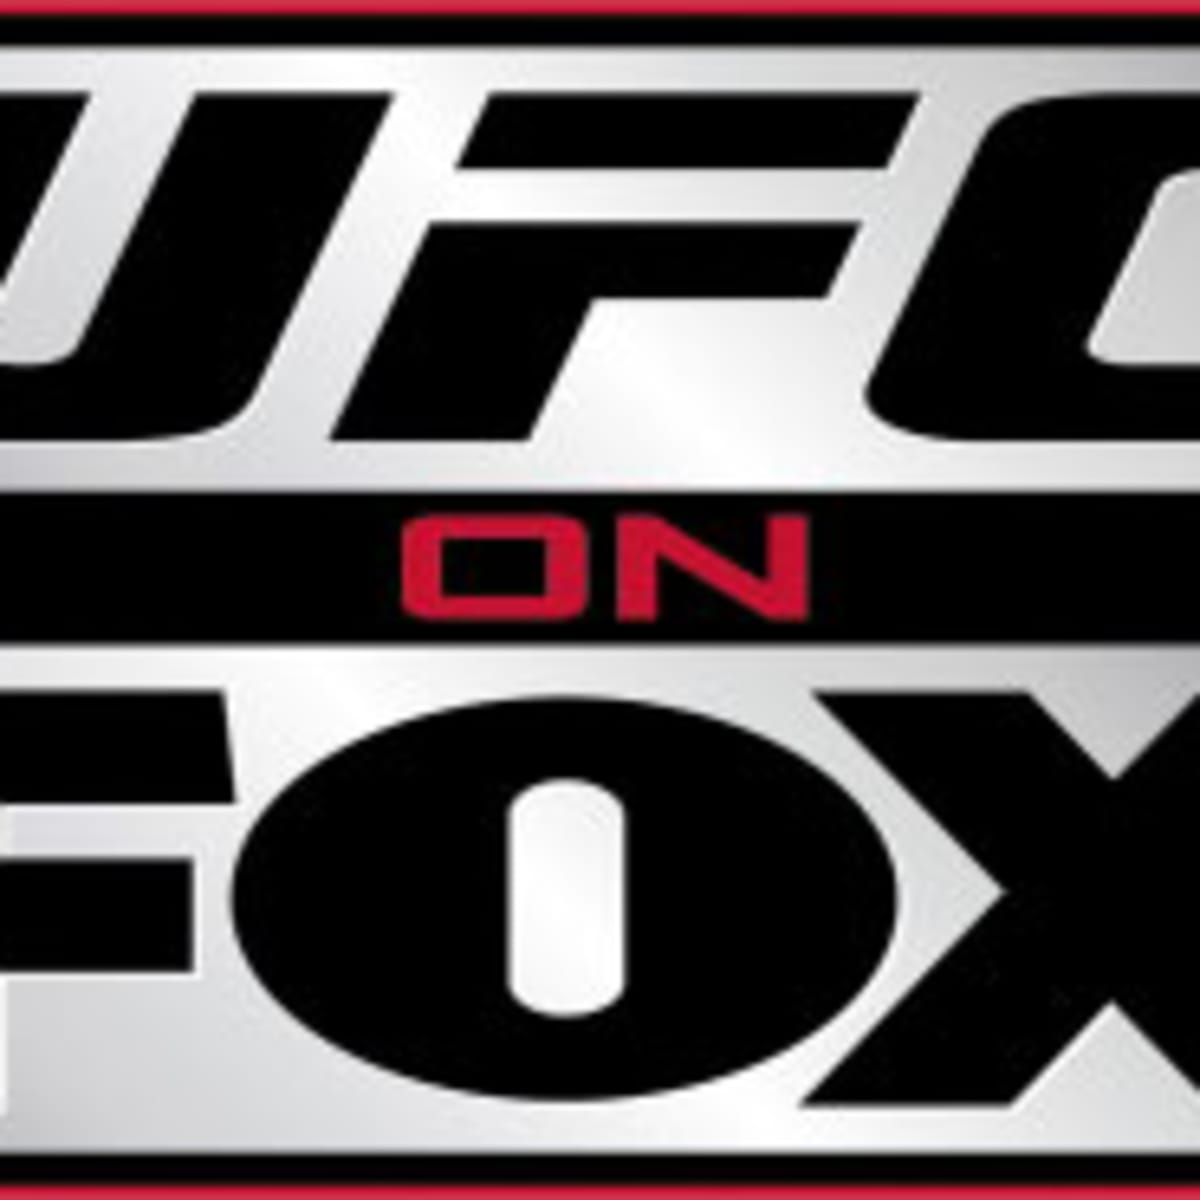 UFC on Fox TV Deal Marks a New Era in Live MMA..